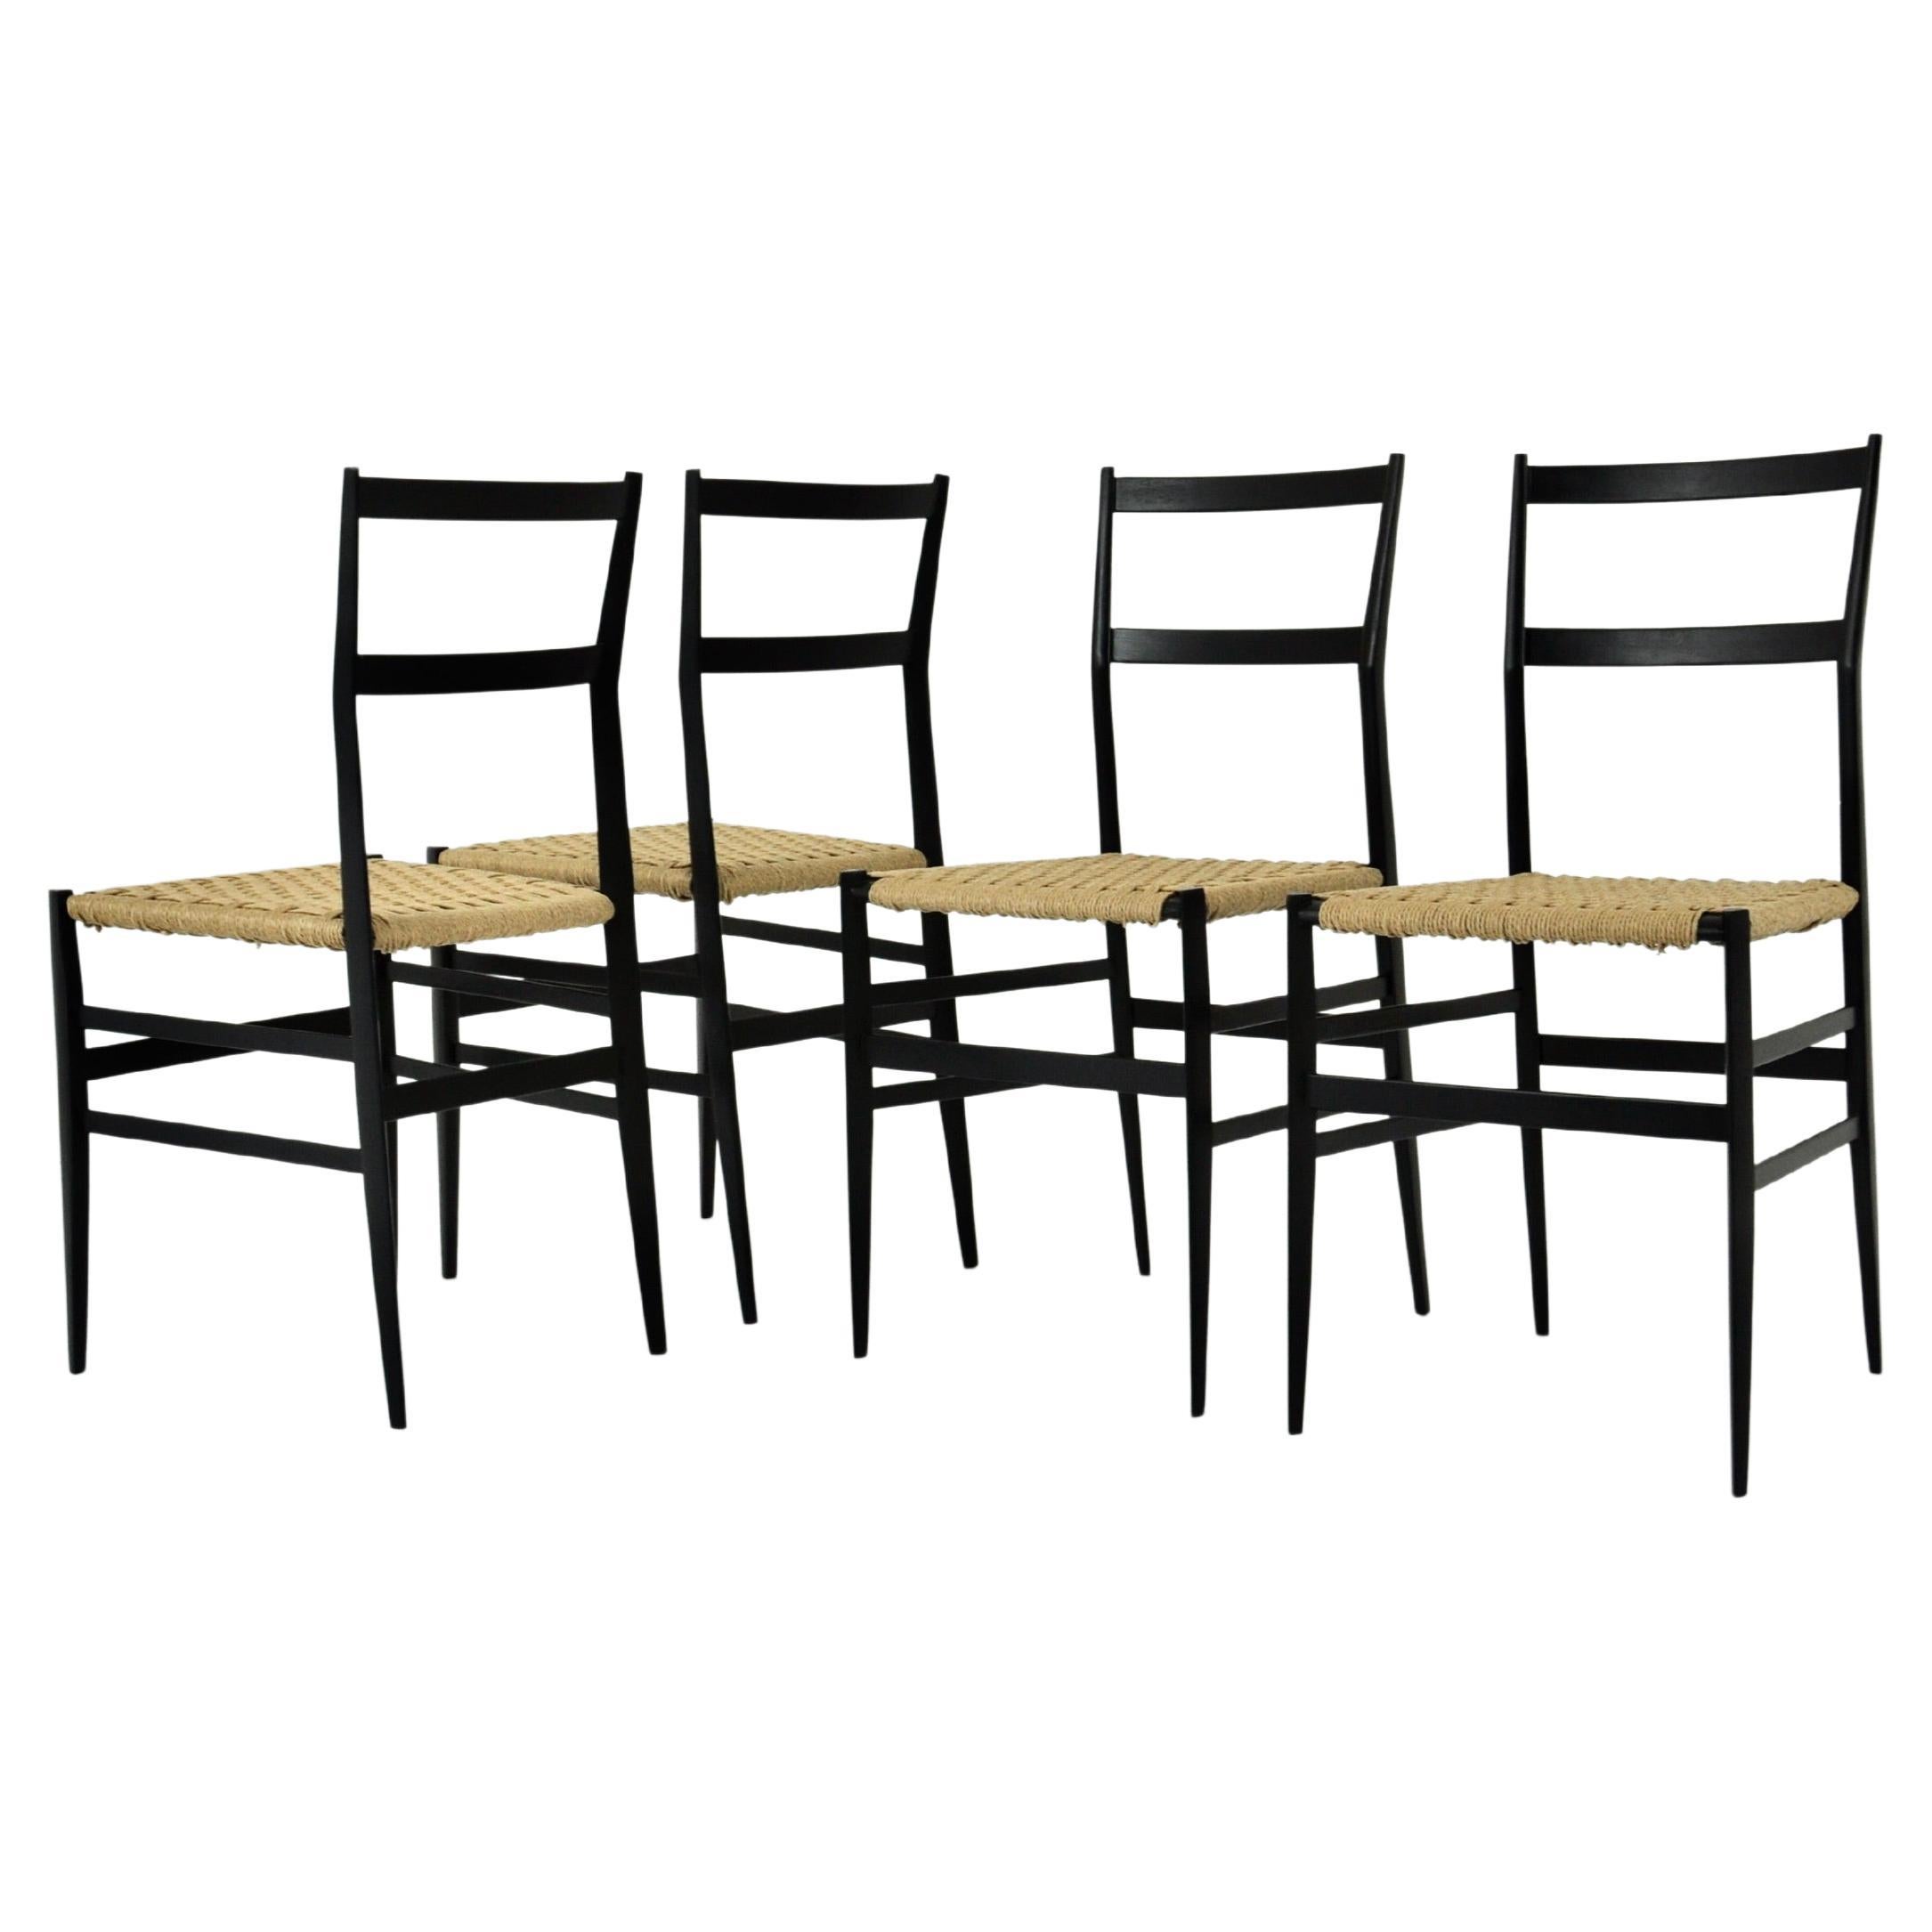 Superleggera Chairs by Gio Ponti for Cassina, 1950s Set of 4